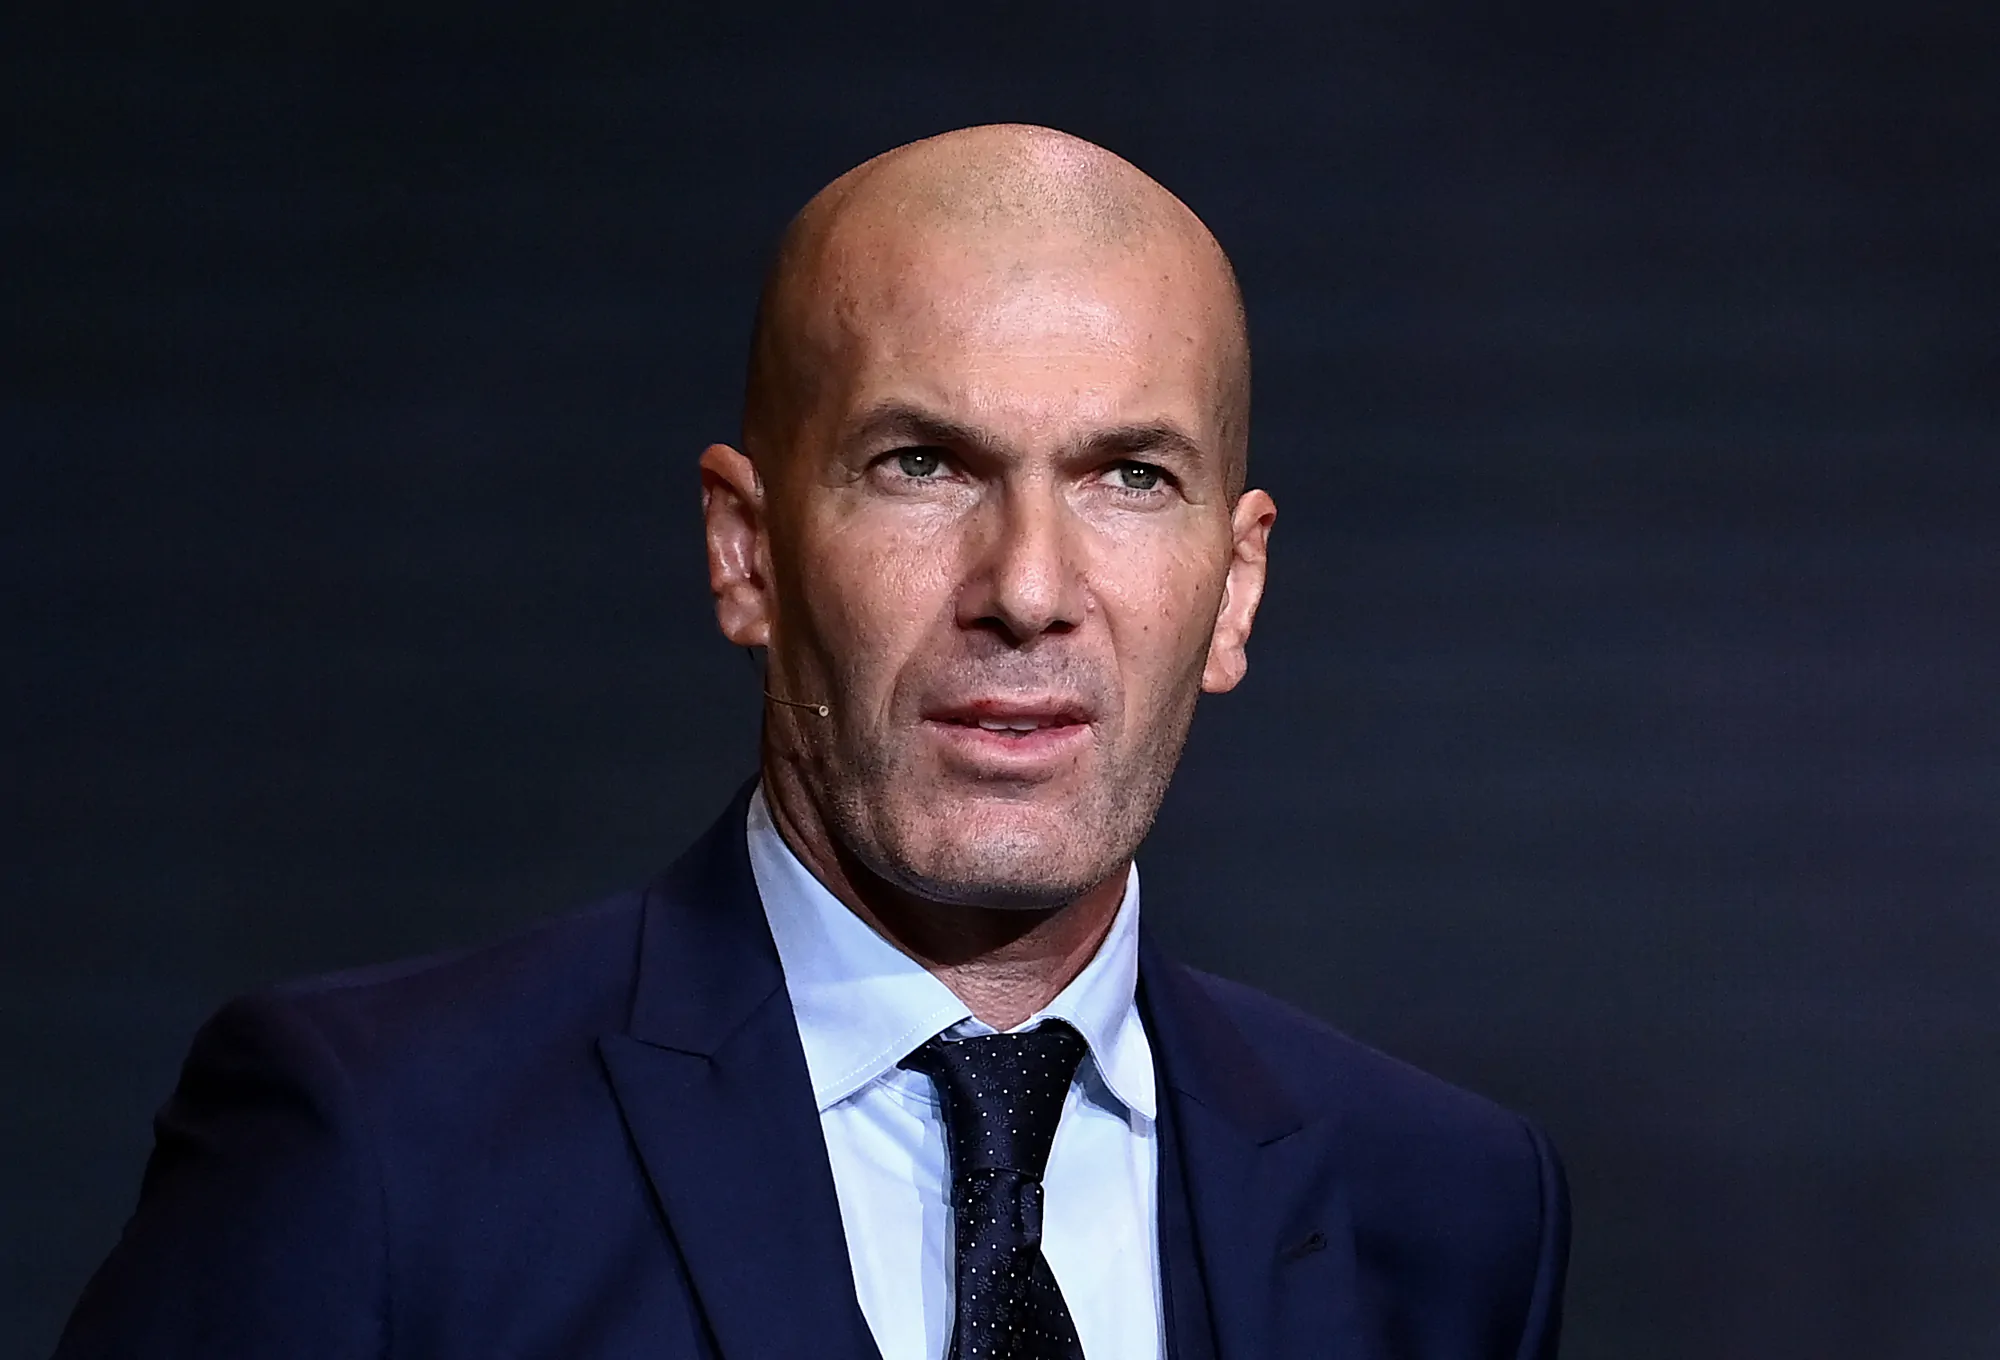 If Didier Deschamps stays at the helm of the French national team, Zinedine Zidane will resume being an option for Juventus.